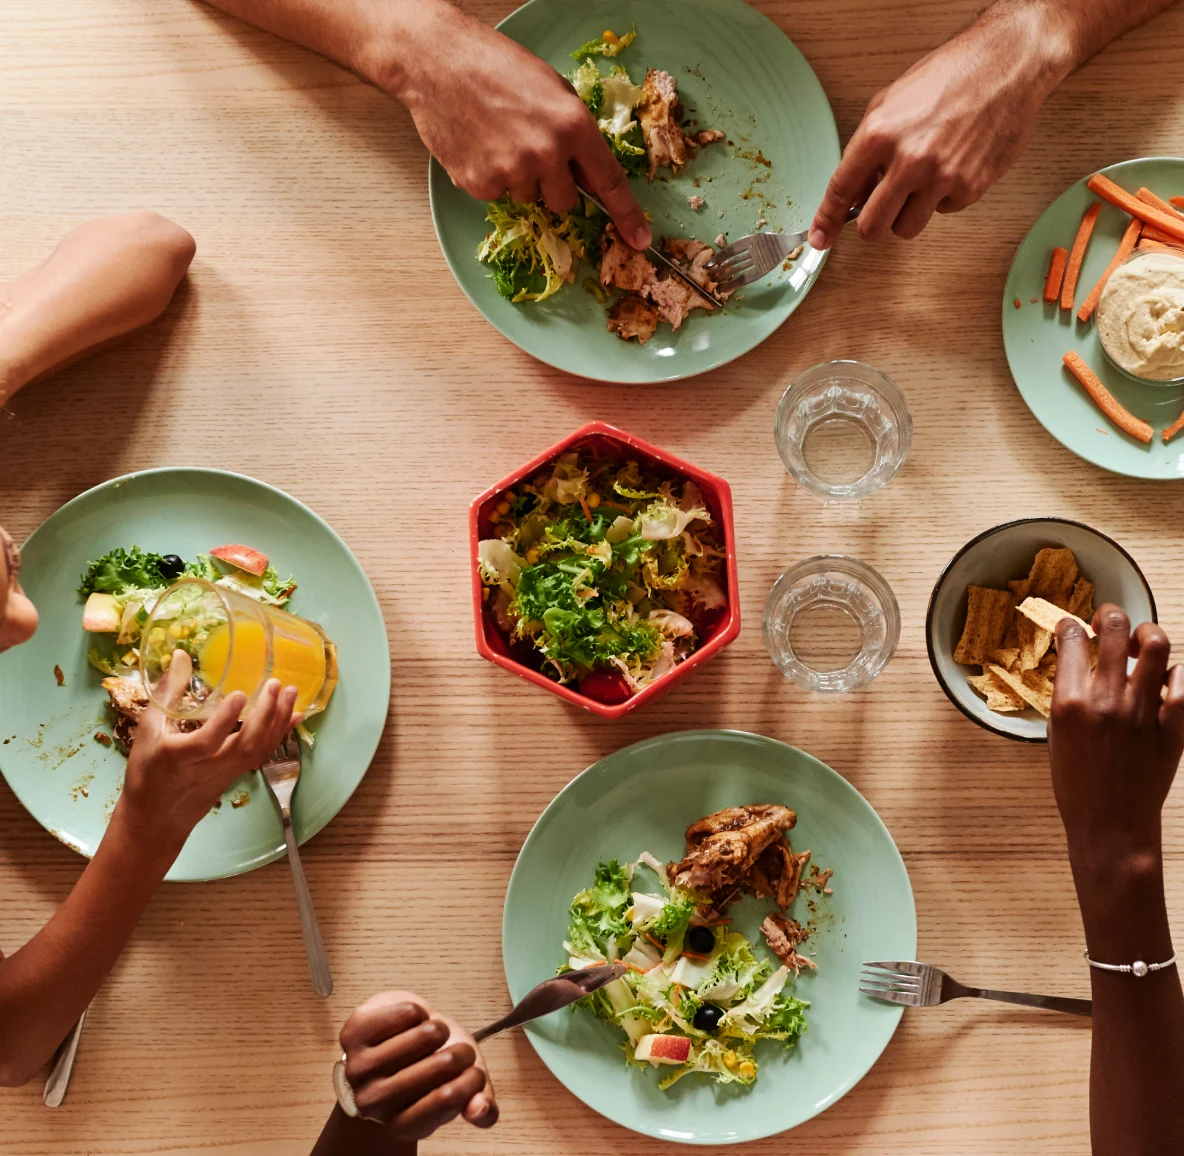 Aerial photo of people’s hands eating salad with chicken on seafoam blue plates